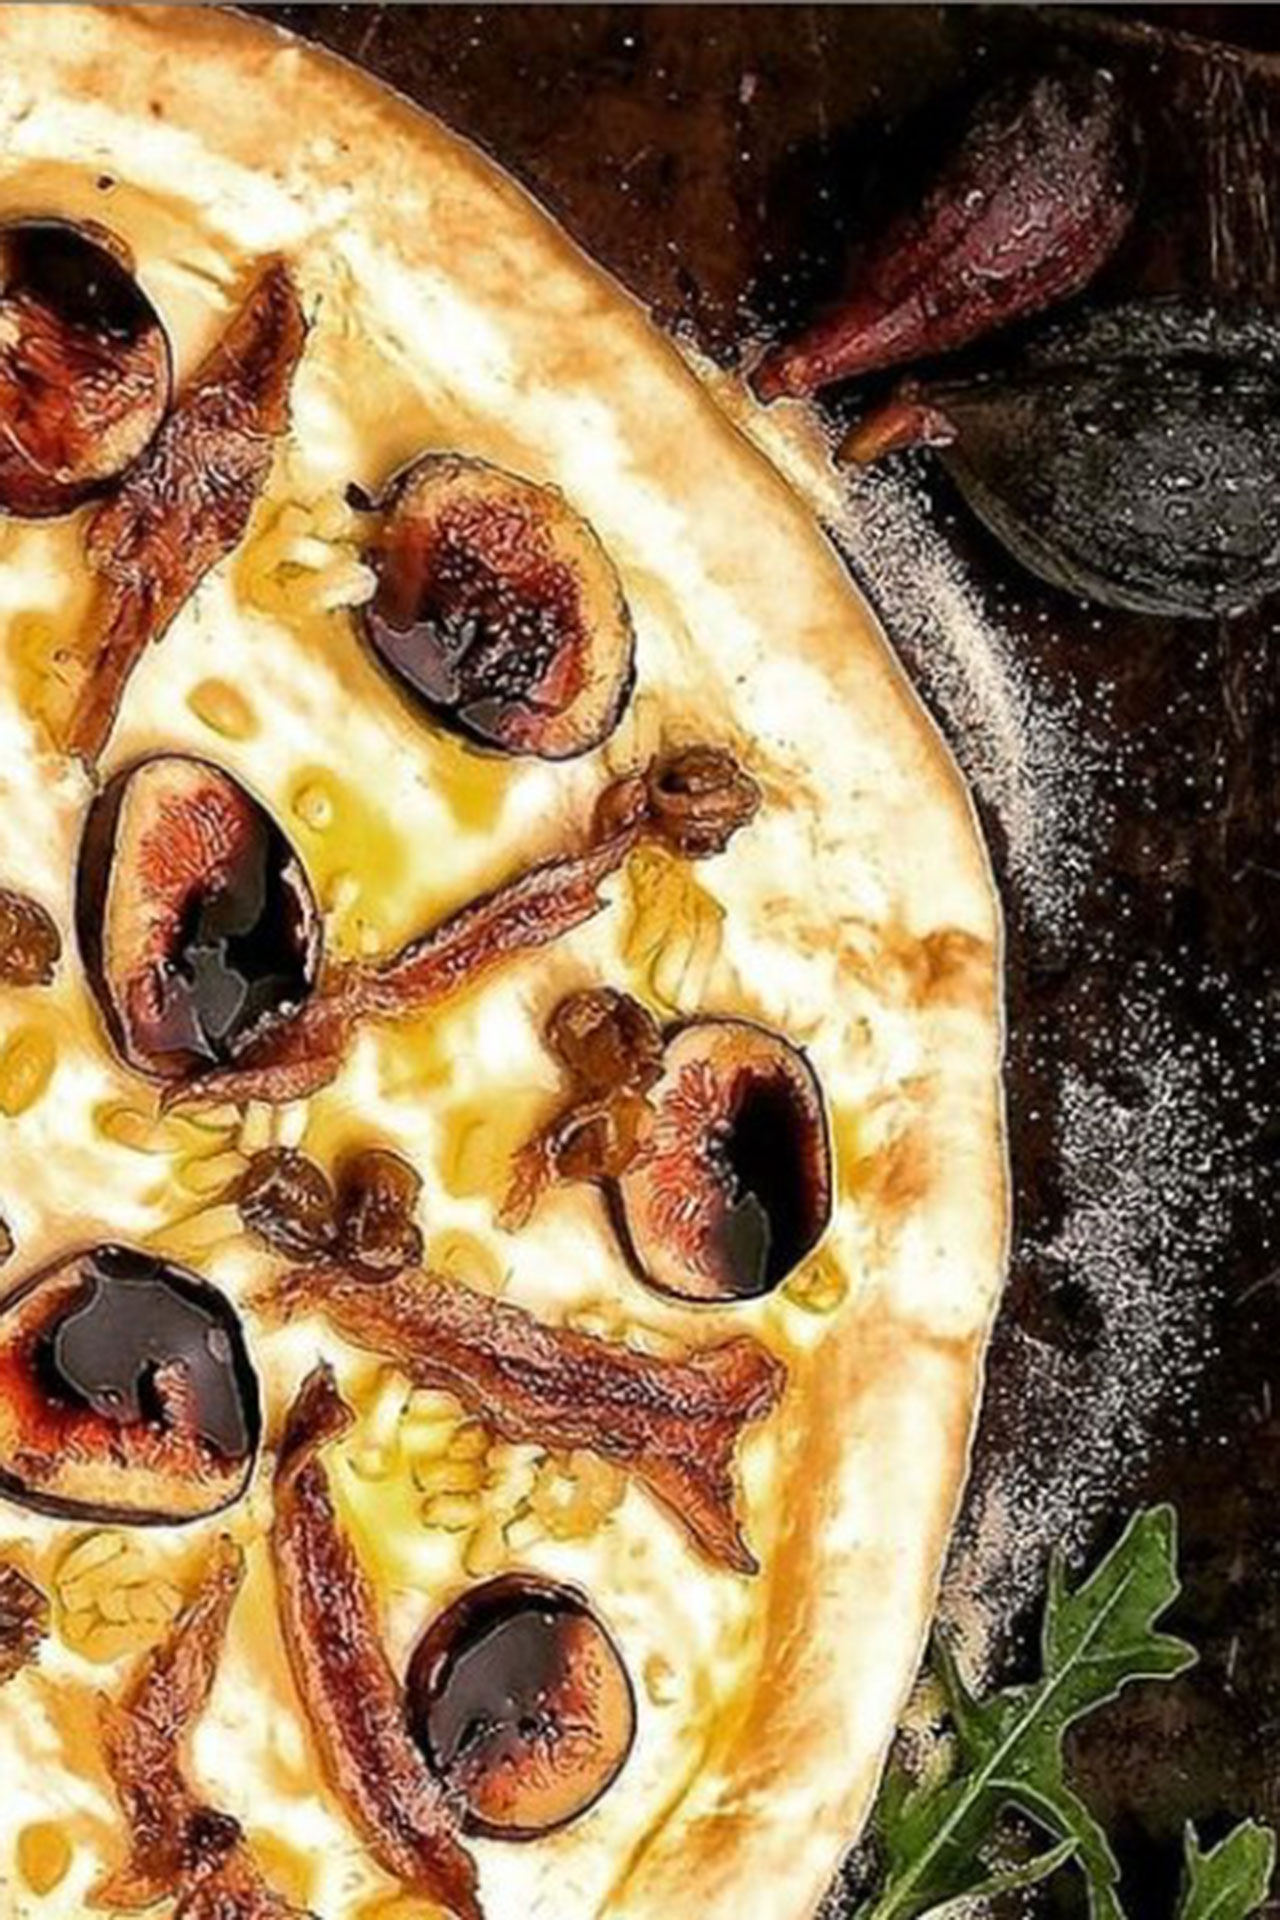 If you love anchovy pizza, this one is for you. The nutty pecorino crusted pizza crust and sweet ripe figs offers the perfect contrast to salty anchovies.